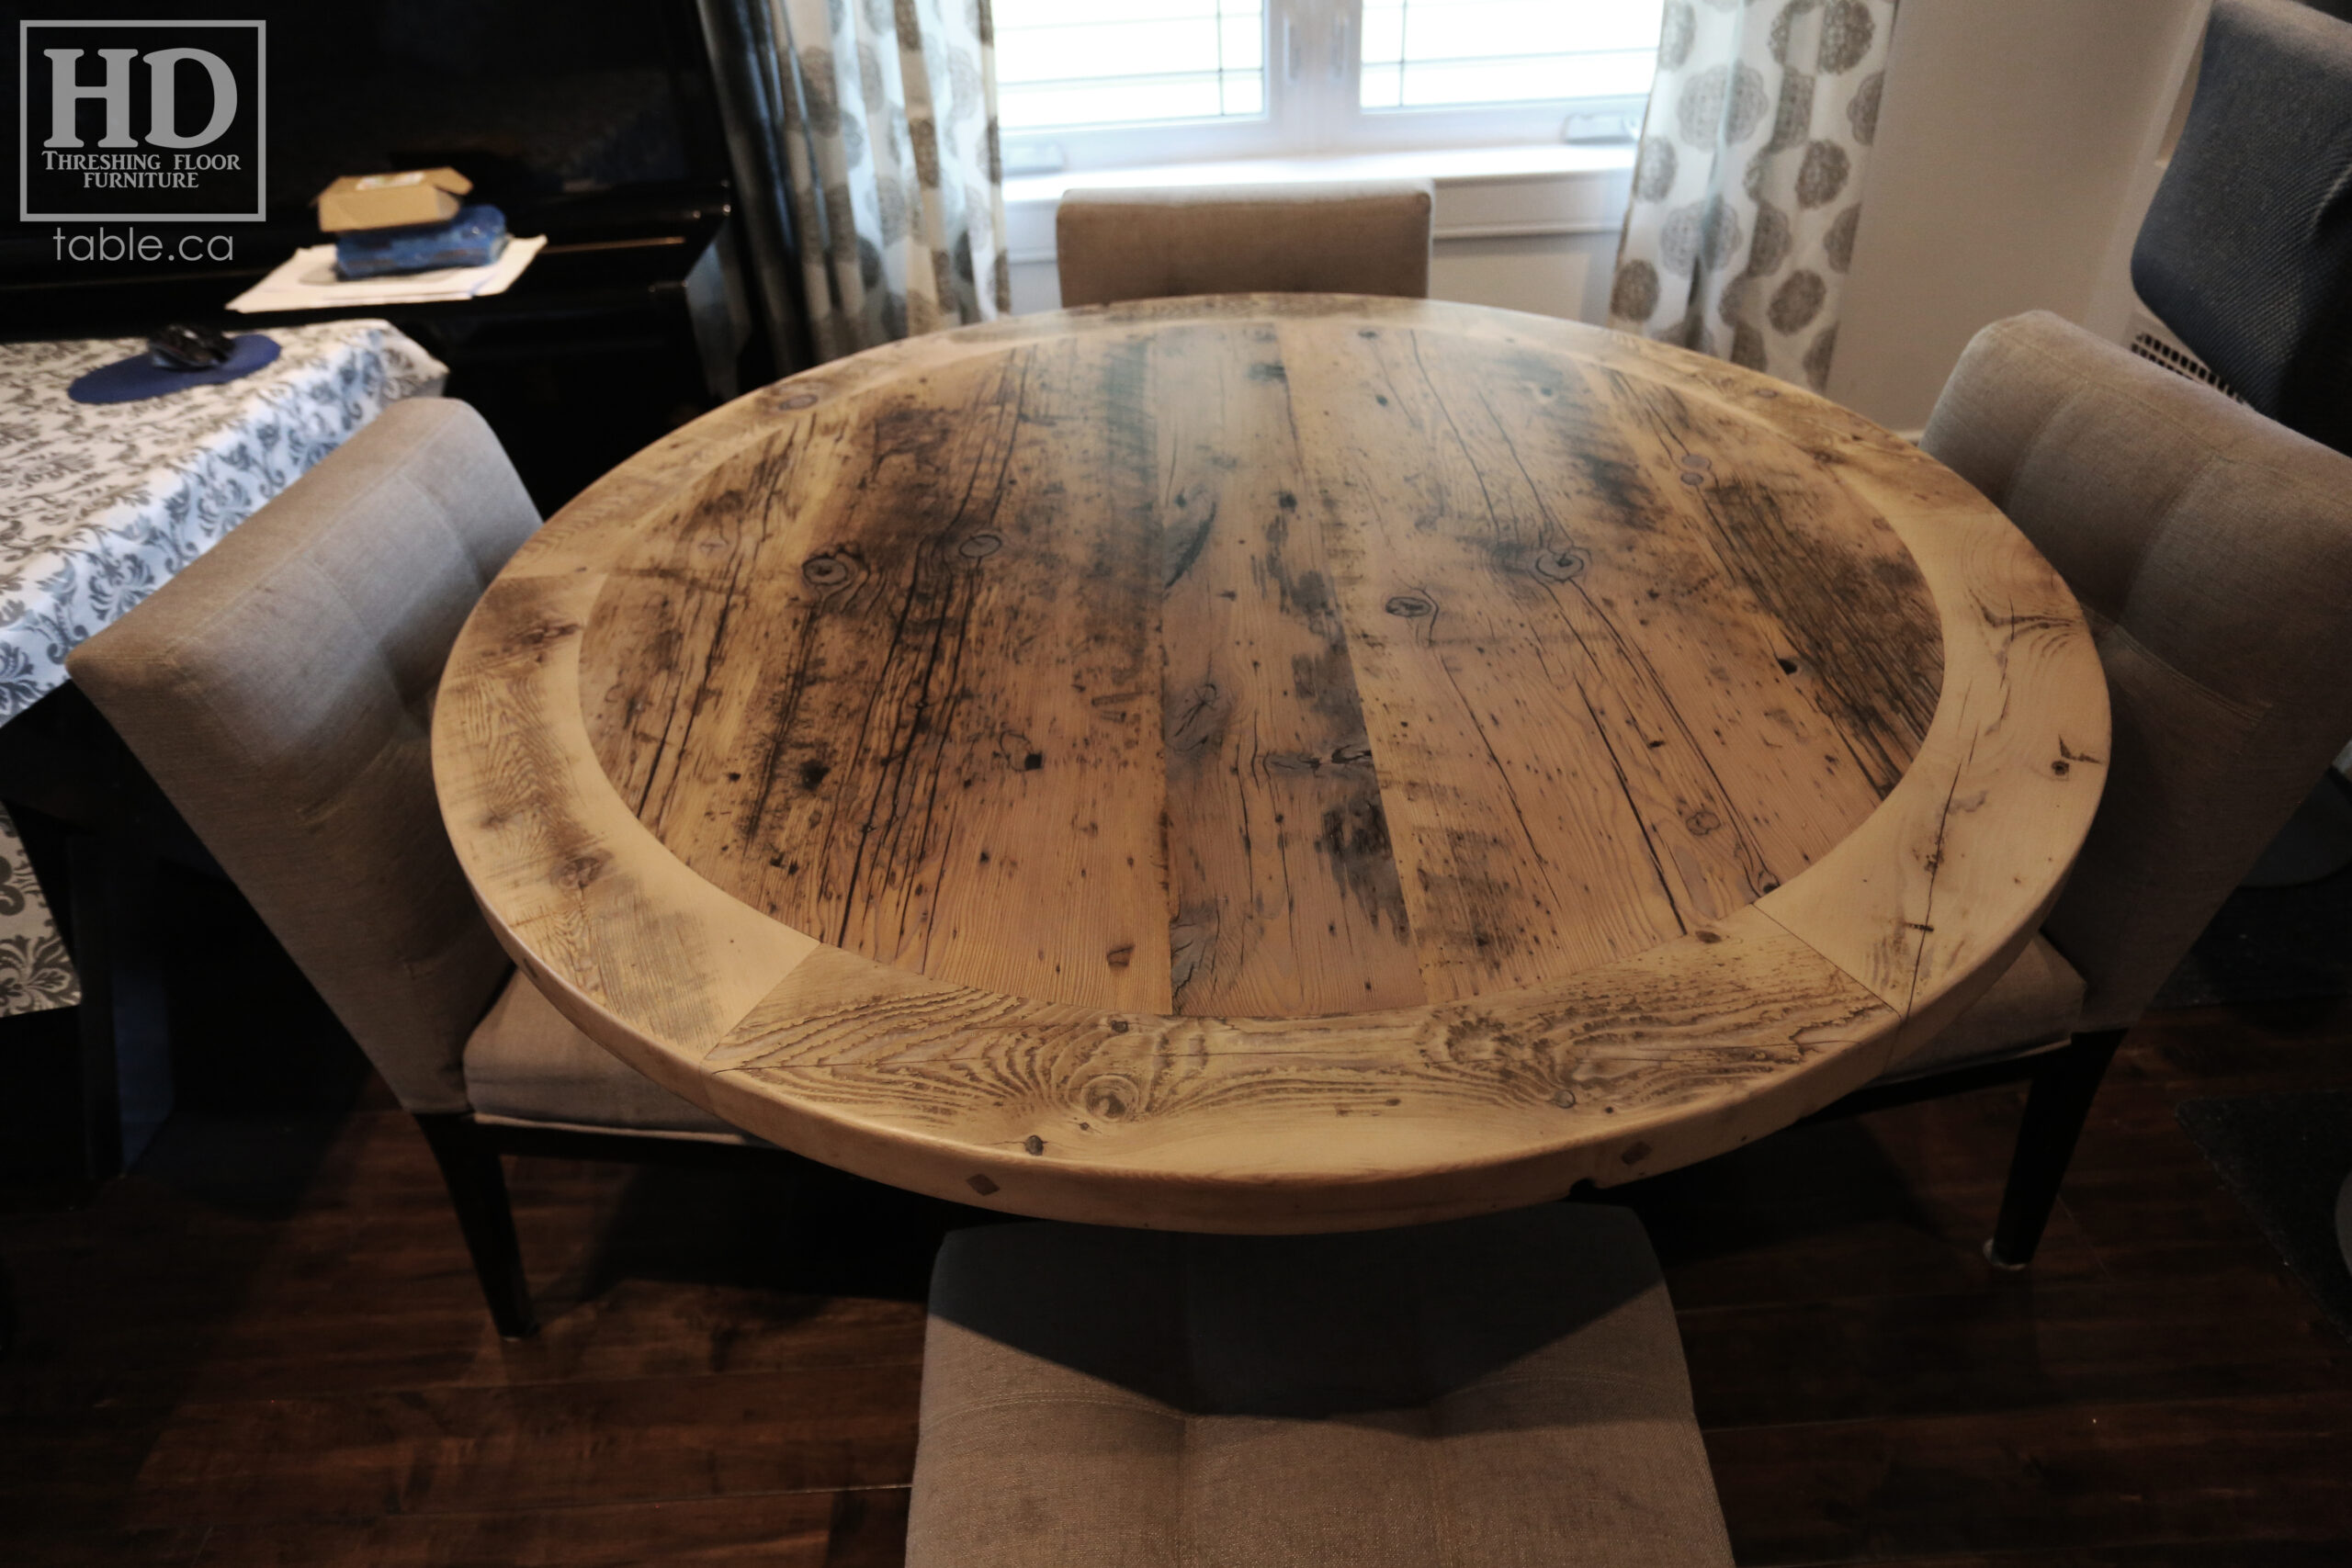 50" Ontario Barnwood Round Table we made for an Toronto, Ontario home - Round Cedar Hydro Pole Base - 2" Hemlock Threshing Floor Top -  Original edges & distressing maintained - Greytone Treatment Option [maintains the light colour of unfinished] - Premium epoxy + matte polyurethane finish - www.table.ca